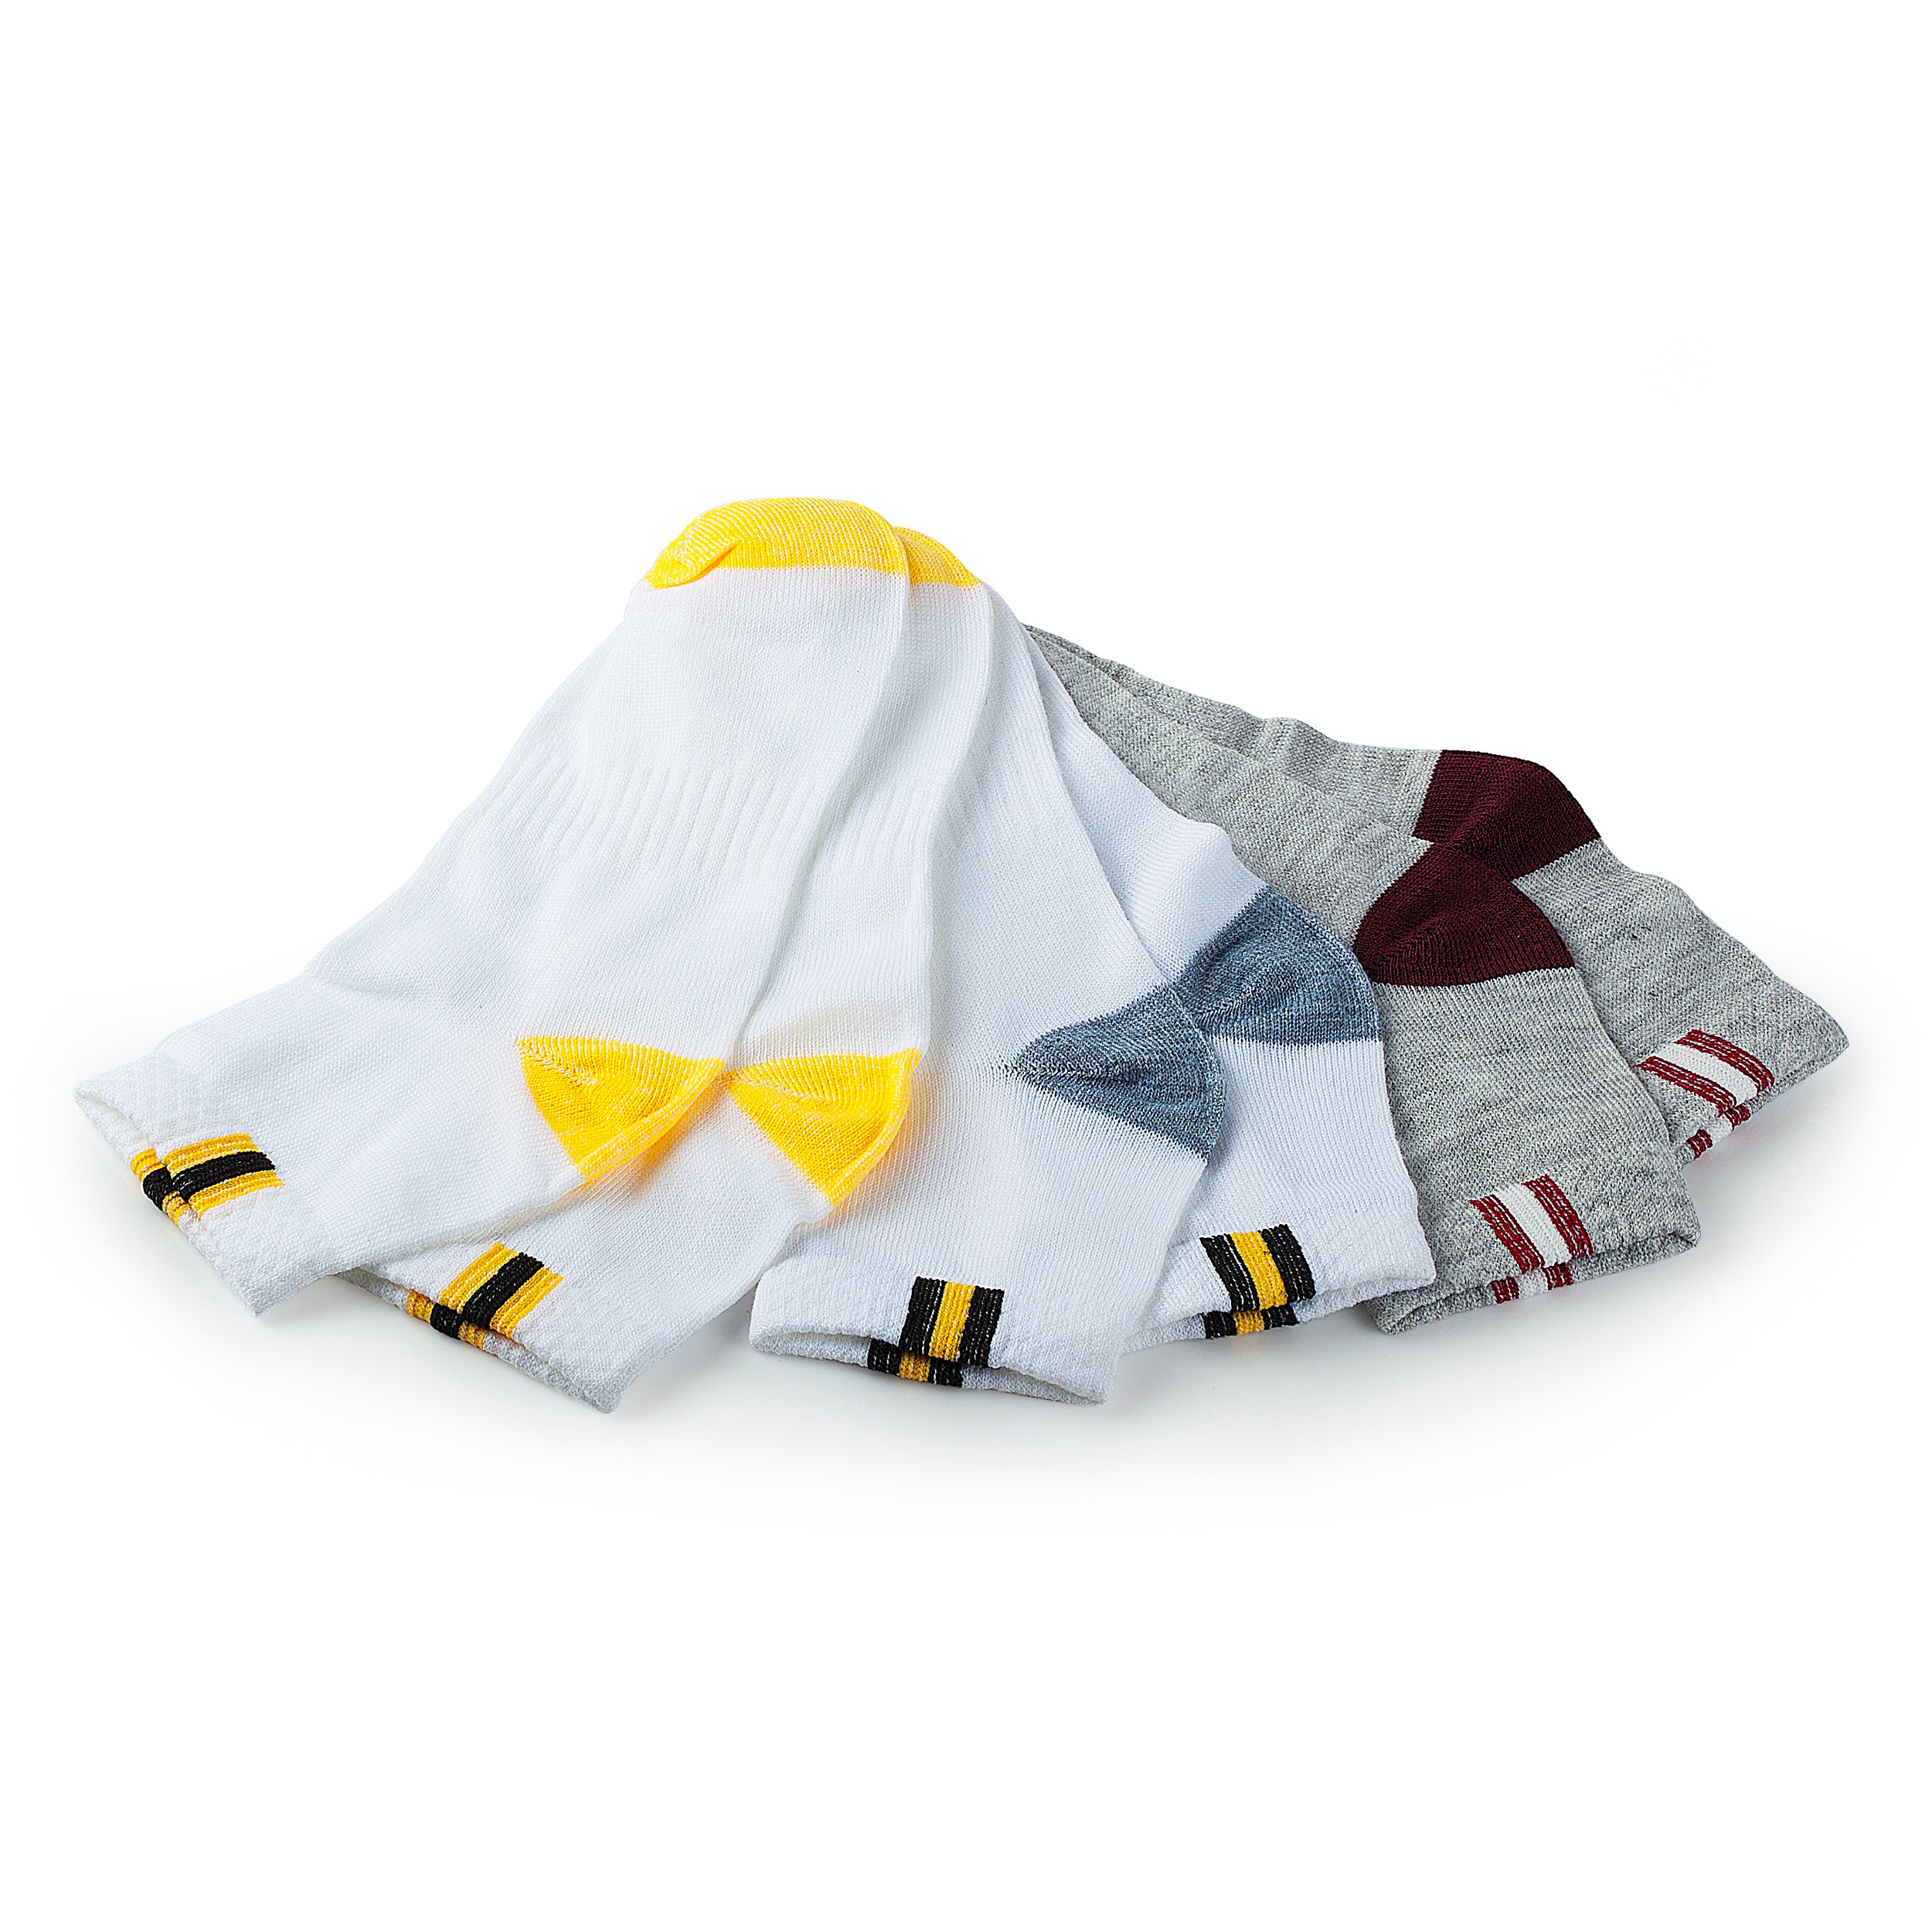 Socks - Kid's Size 4-8 Multi-Pack Polyester/Cotton Socks (10 Pairs) (Available In April!)